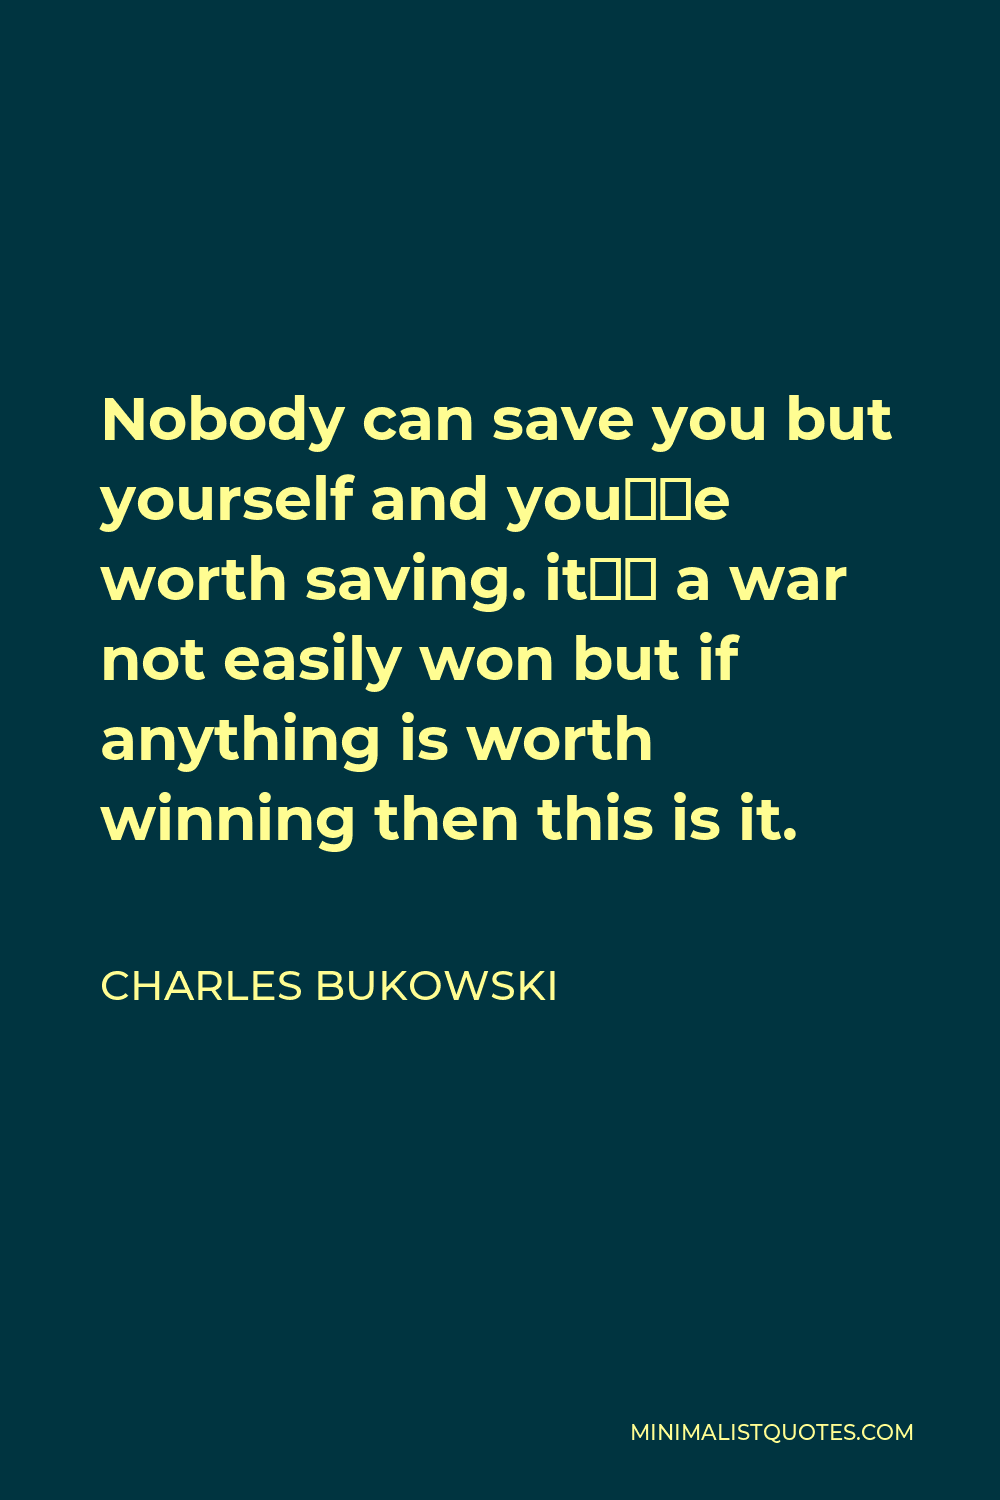 Charles Bukowski Quote Nobody Can Save You But Yourself And You Re Worth Saving It S A War Not Easily Won But If Anything Is Worth Winning Then This Is It